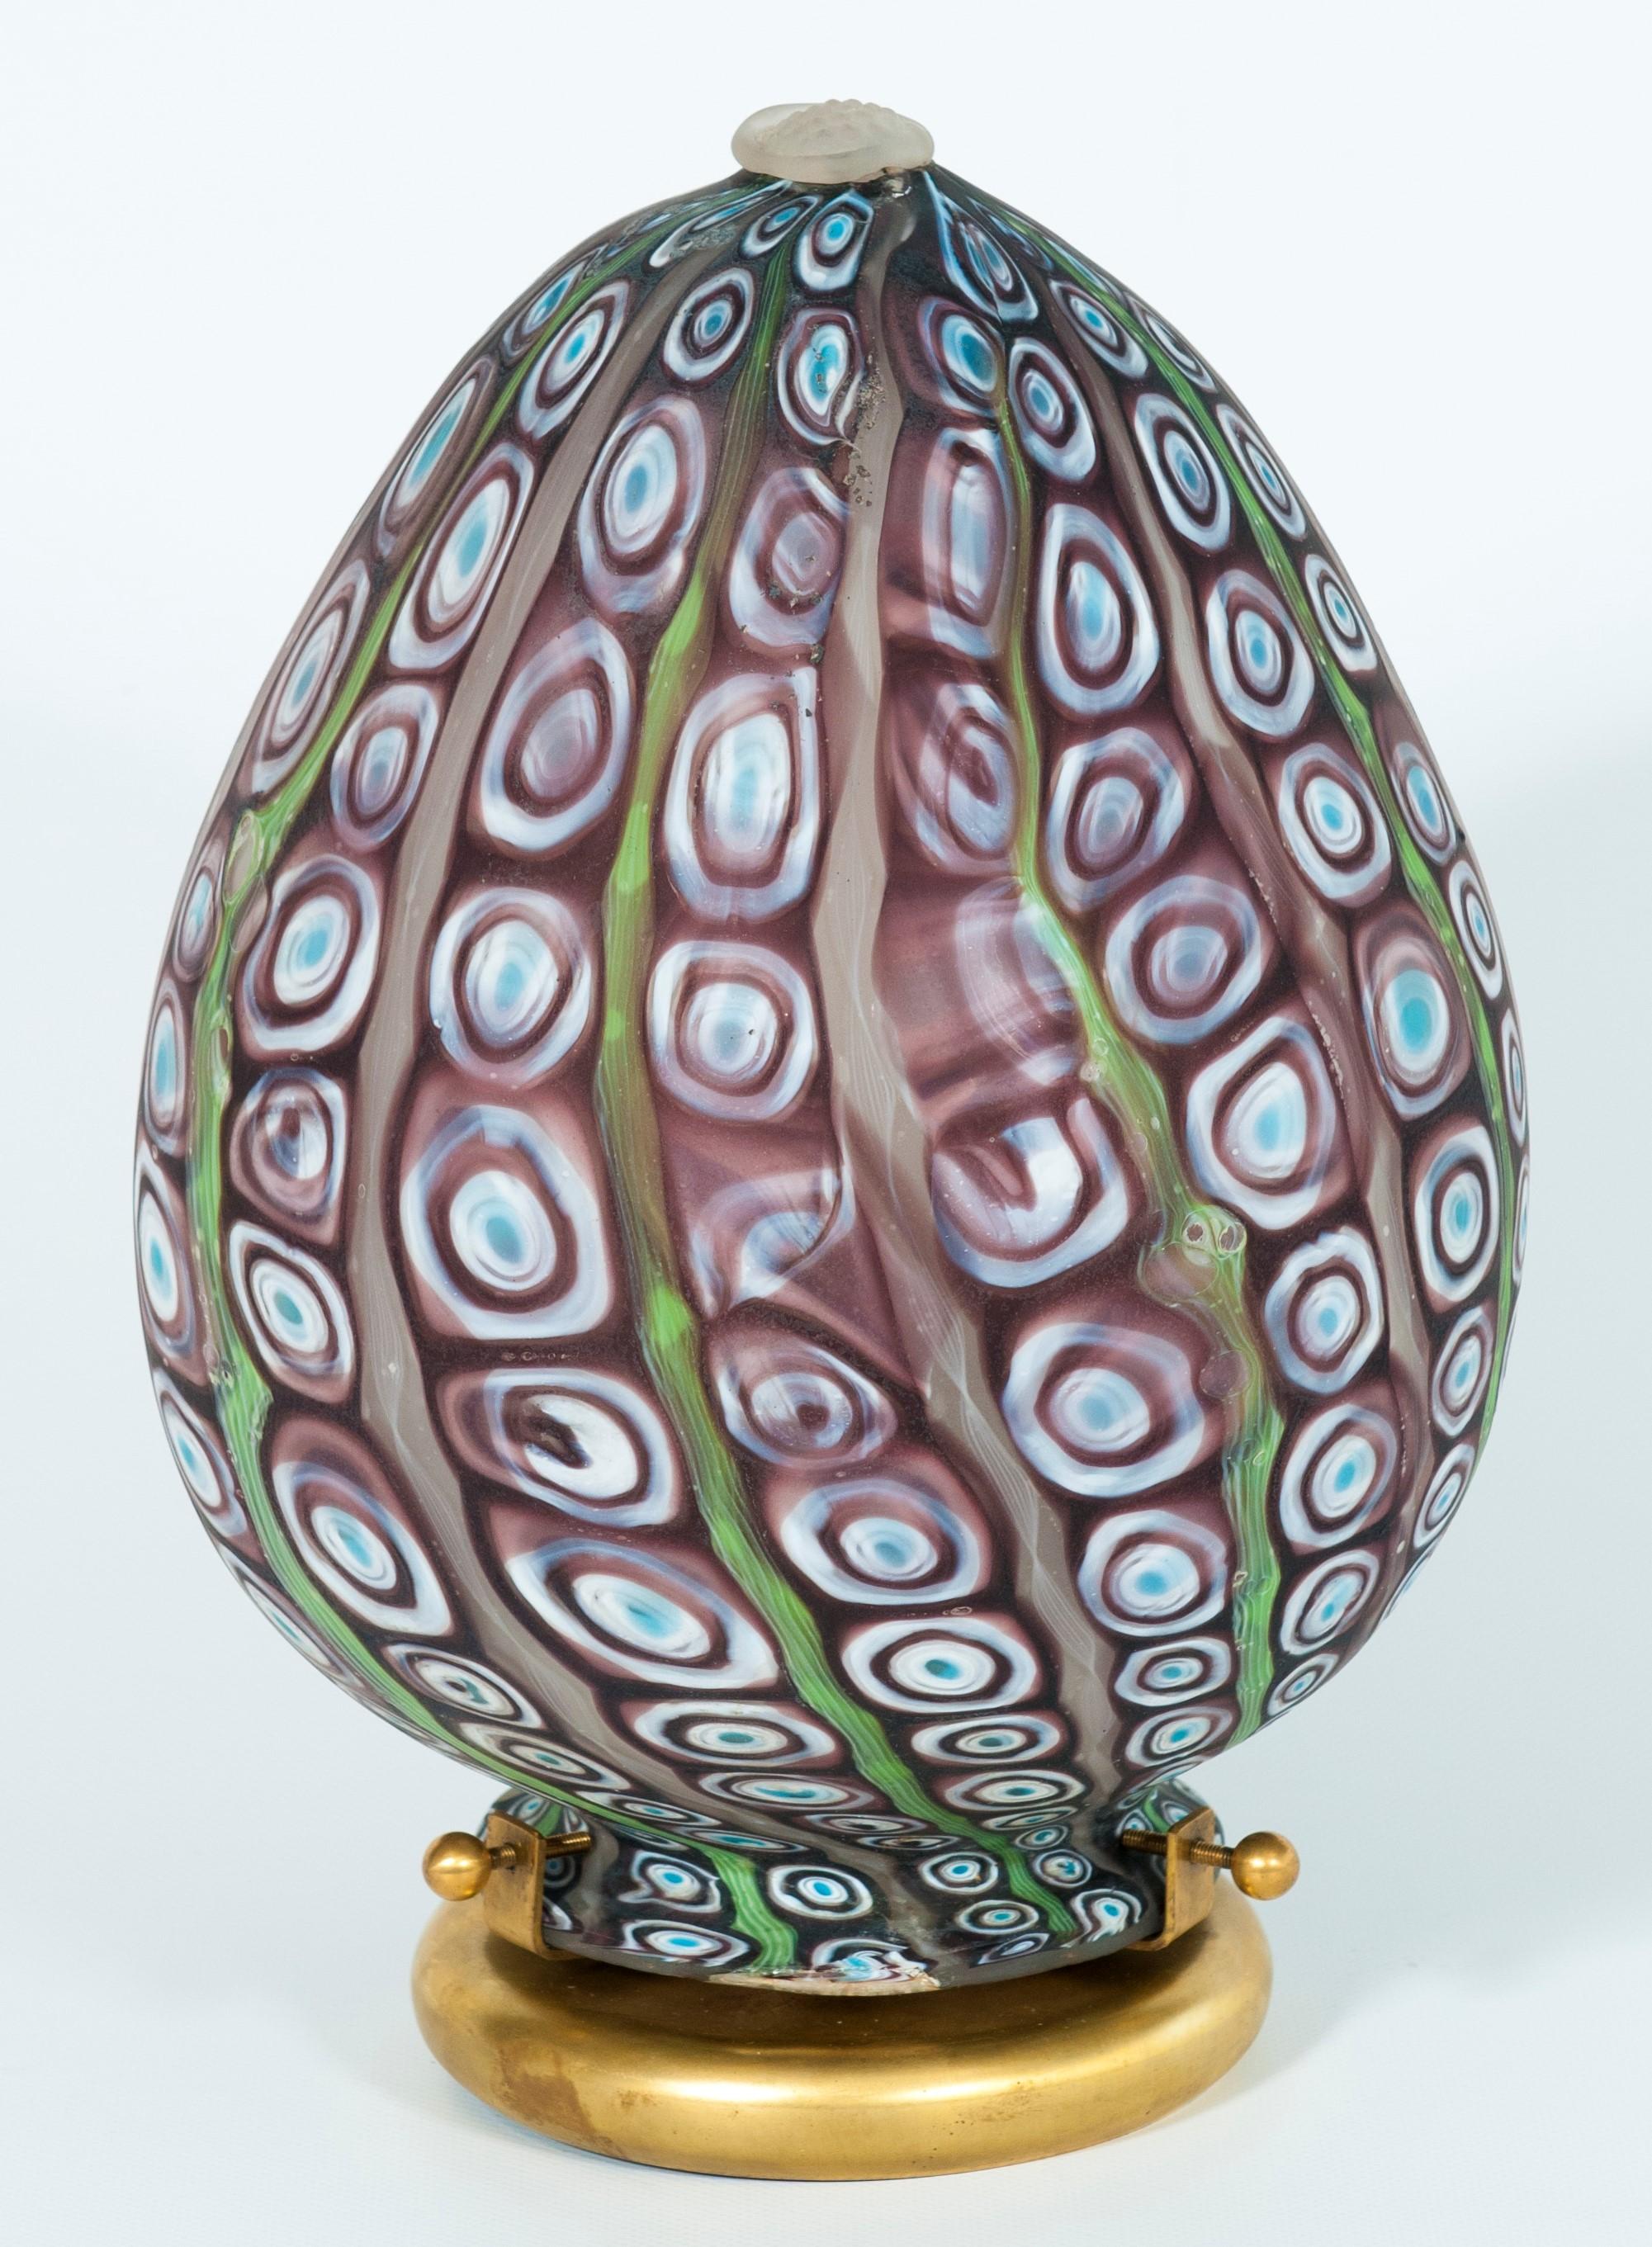 Oval Murano glass table lamp with colorful Venetian Murinas, Italy, 1980s
This extraordinary oval table lamp takes the external appearance of an egg, but its inner burst of light donates a totally new nature to this beautiful masterpiece, making it